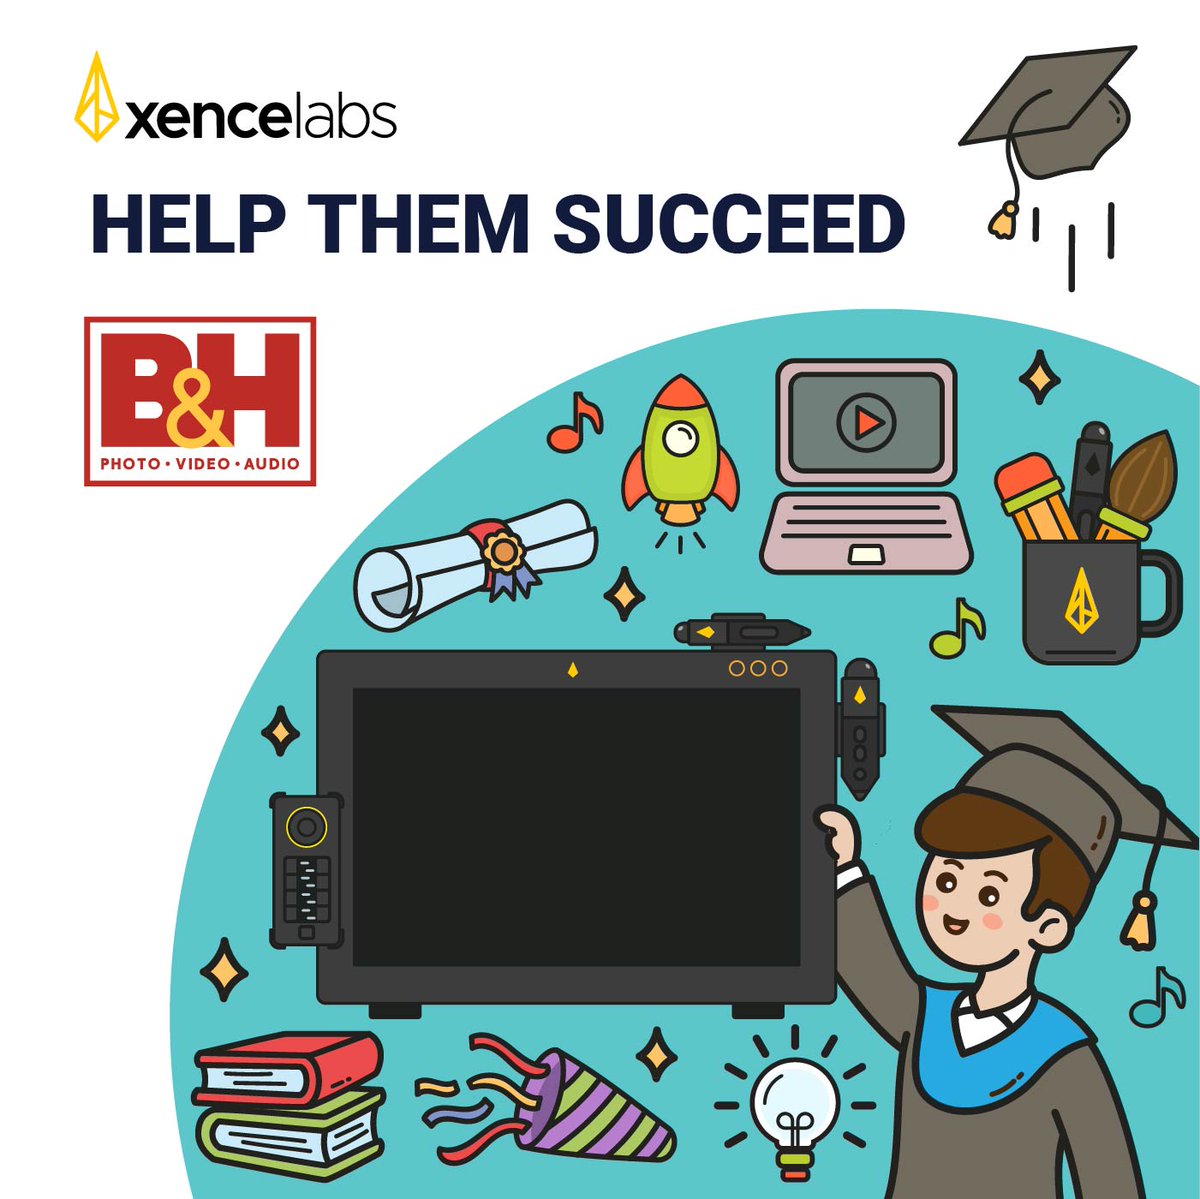 Helping your graduate reach their full potential in digital art and design starts with the gift of technology. #Xencelabs #PenDisplay24 is the ideal gift for the newly graduated digital #contentcreator in your life. Find us at #BHphoto! ow.ly/Yhrh50RiuJQ